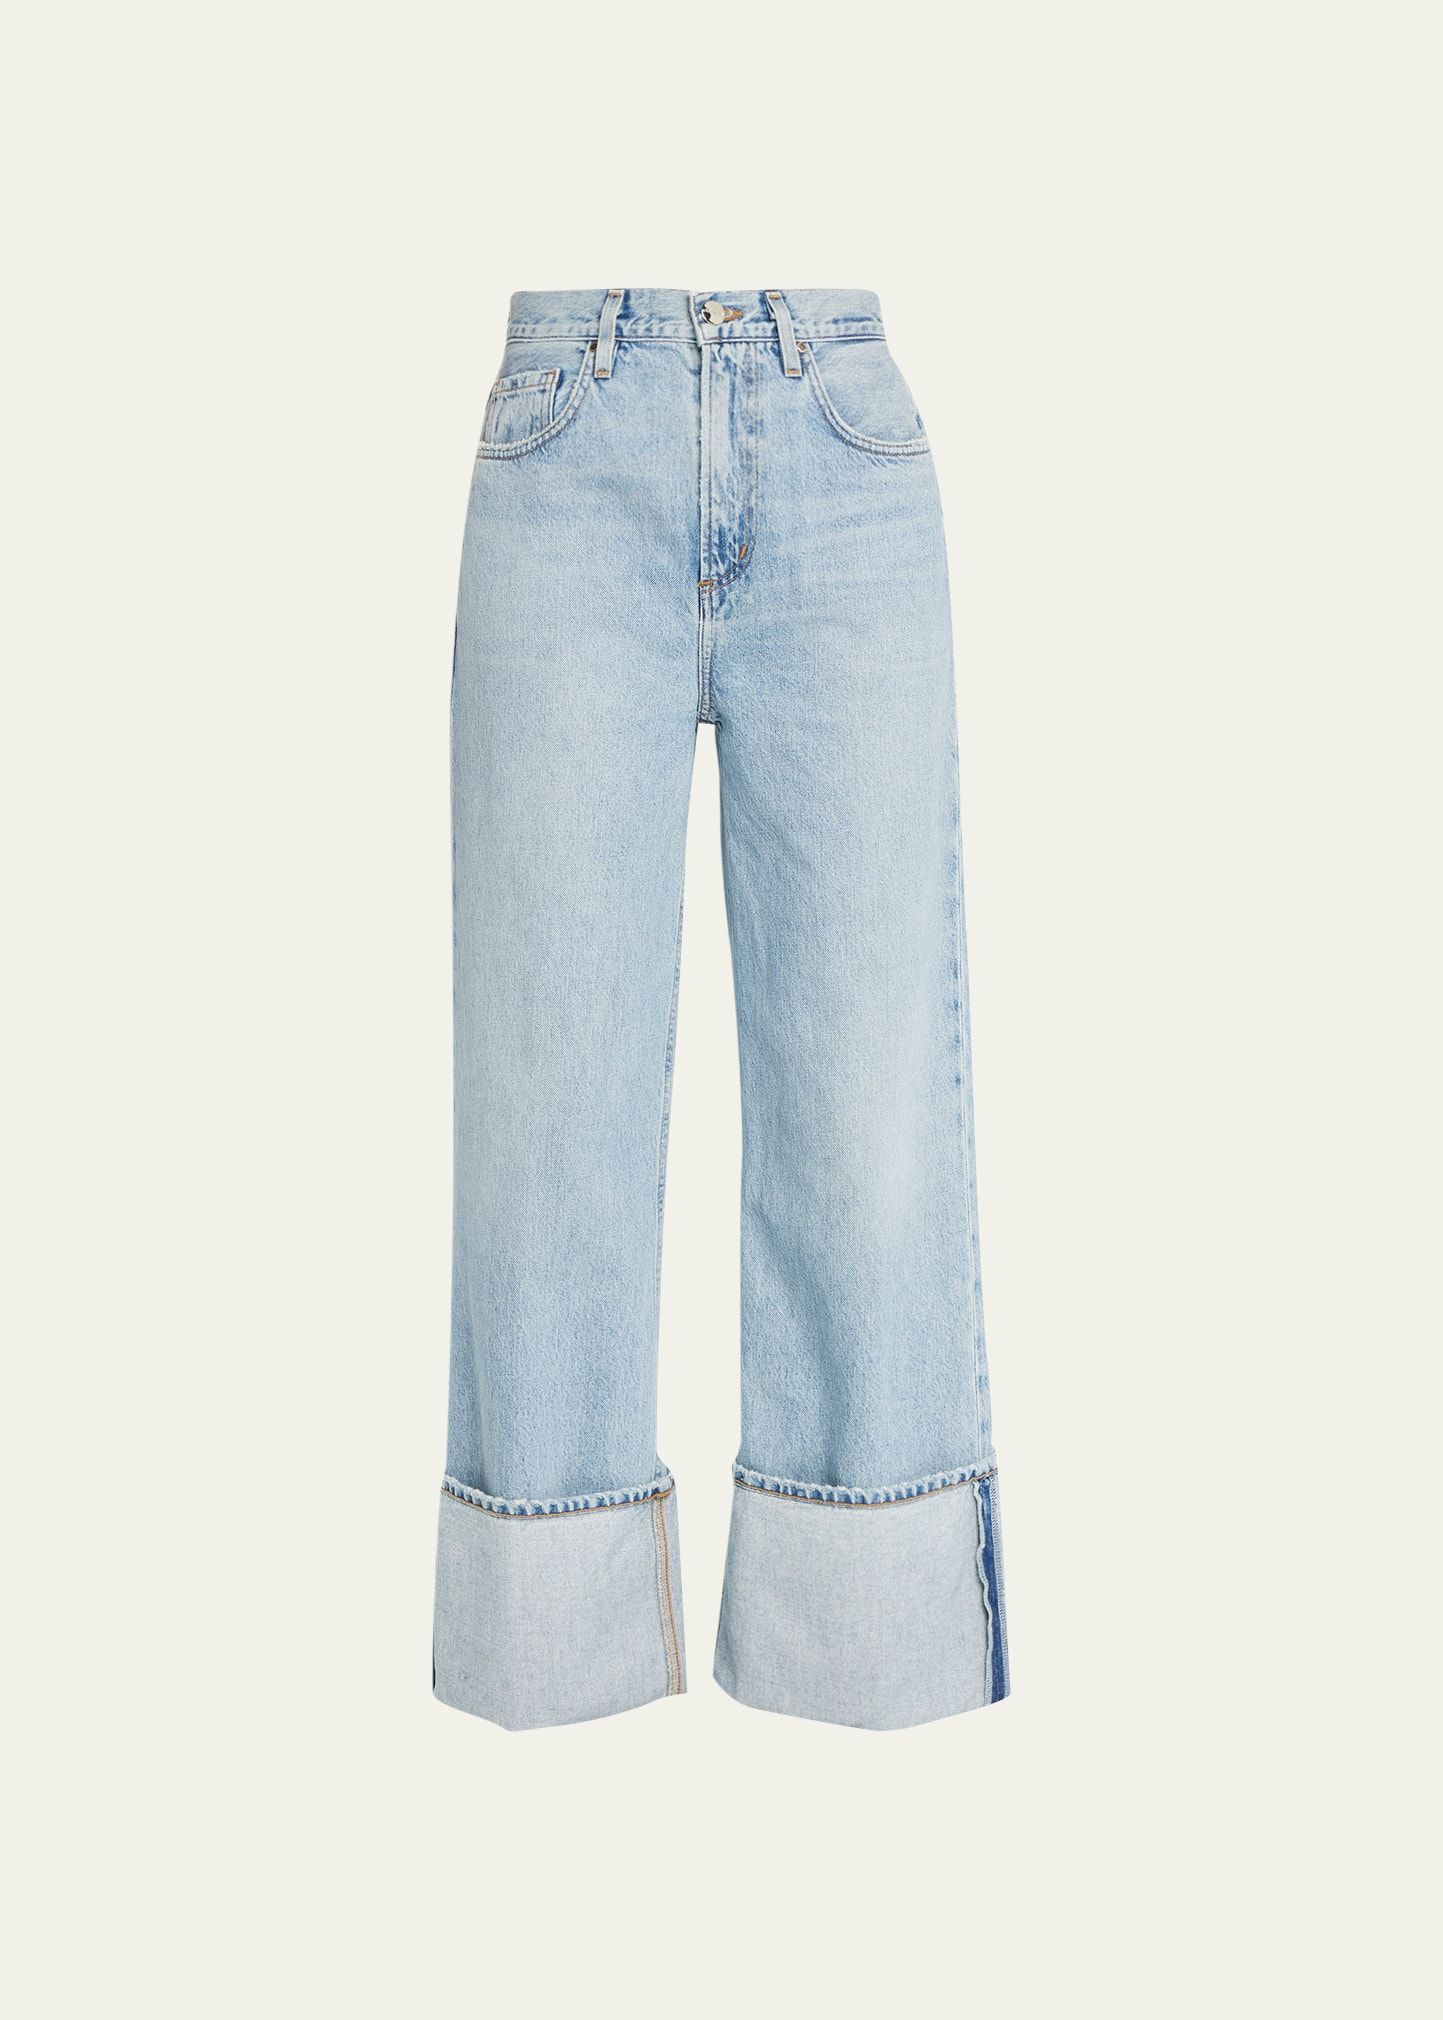 Goldsign The Astley Wide Straight Cuffed Jeans | Bergdorf Goodman